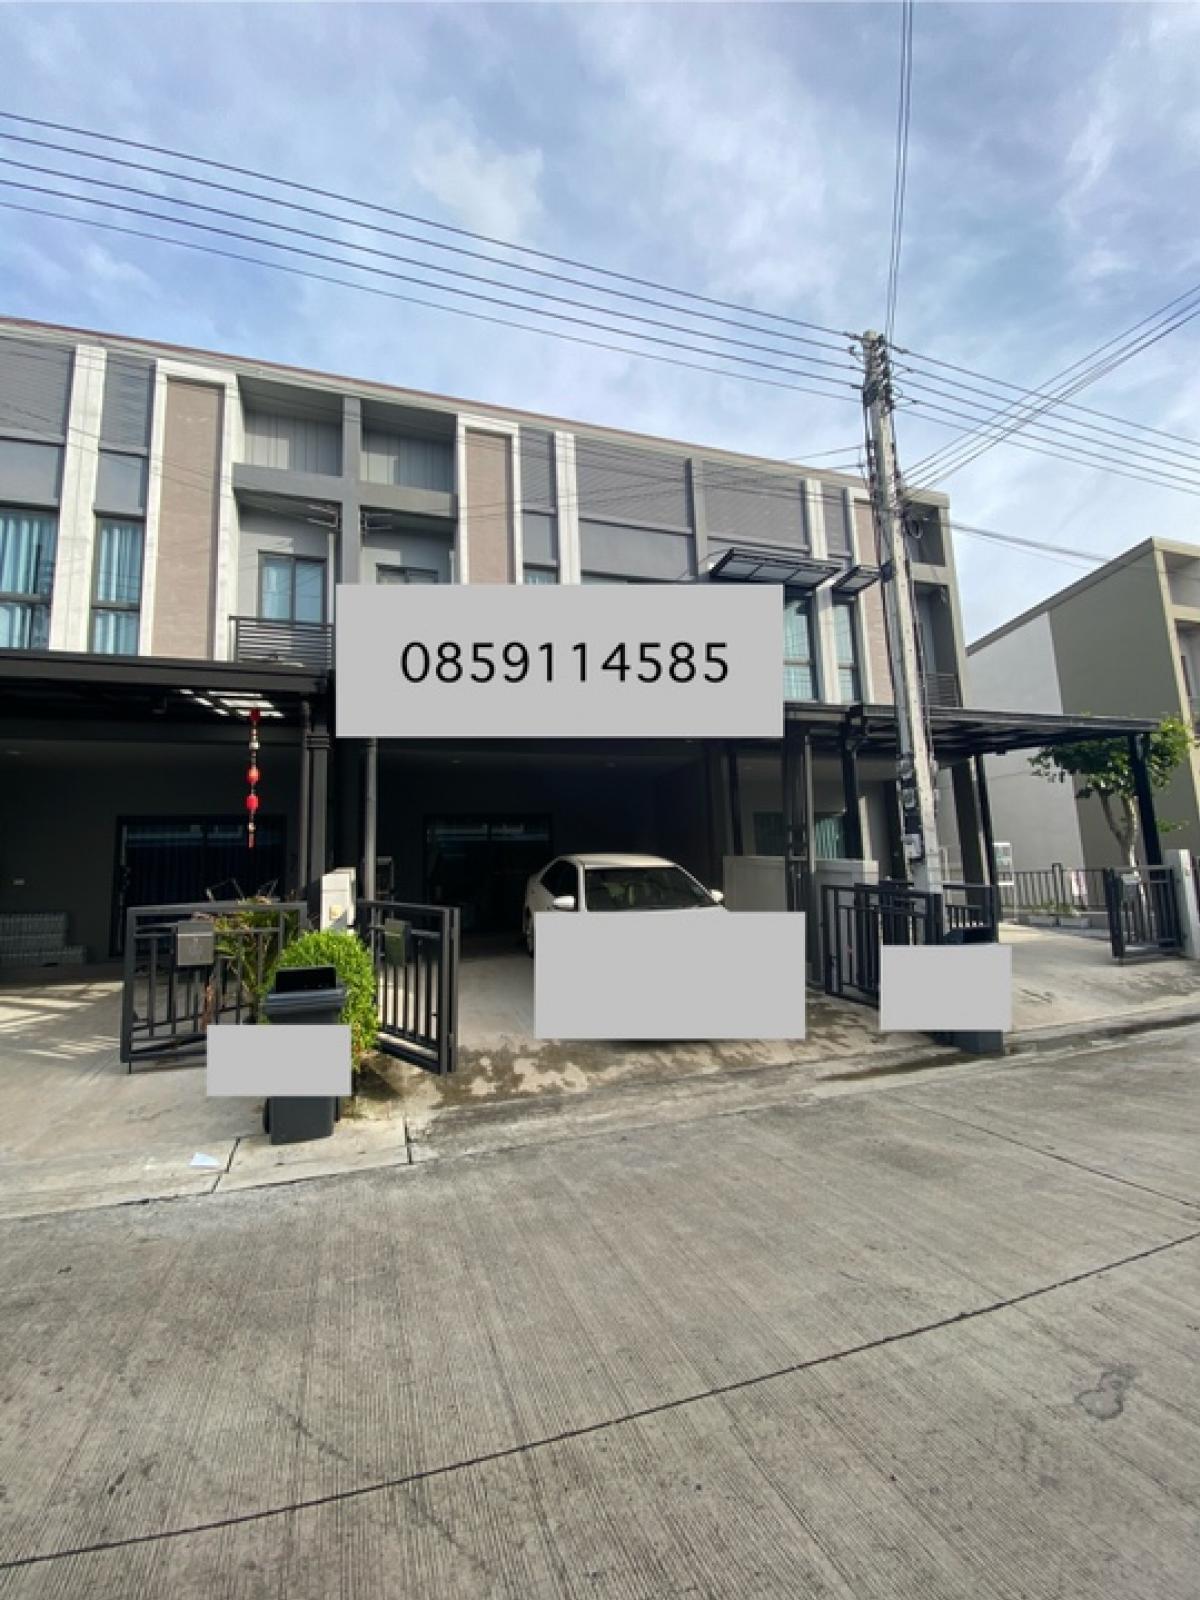 For SaleHousePathum Thani,Rangsit, Thammasat : ❤️❤️ 2-story townhome for sale, V compound village Tiwanon. Rangsit, parking for 2 cars, 2 bedrooms, 2 bathrooms, 1 storage room, usable area 110 sq m (17.5 sq m). Interested, line/tel 0859114585 ❤️❤️ Selling for only 2.75 million, transfer fee is half ea